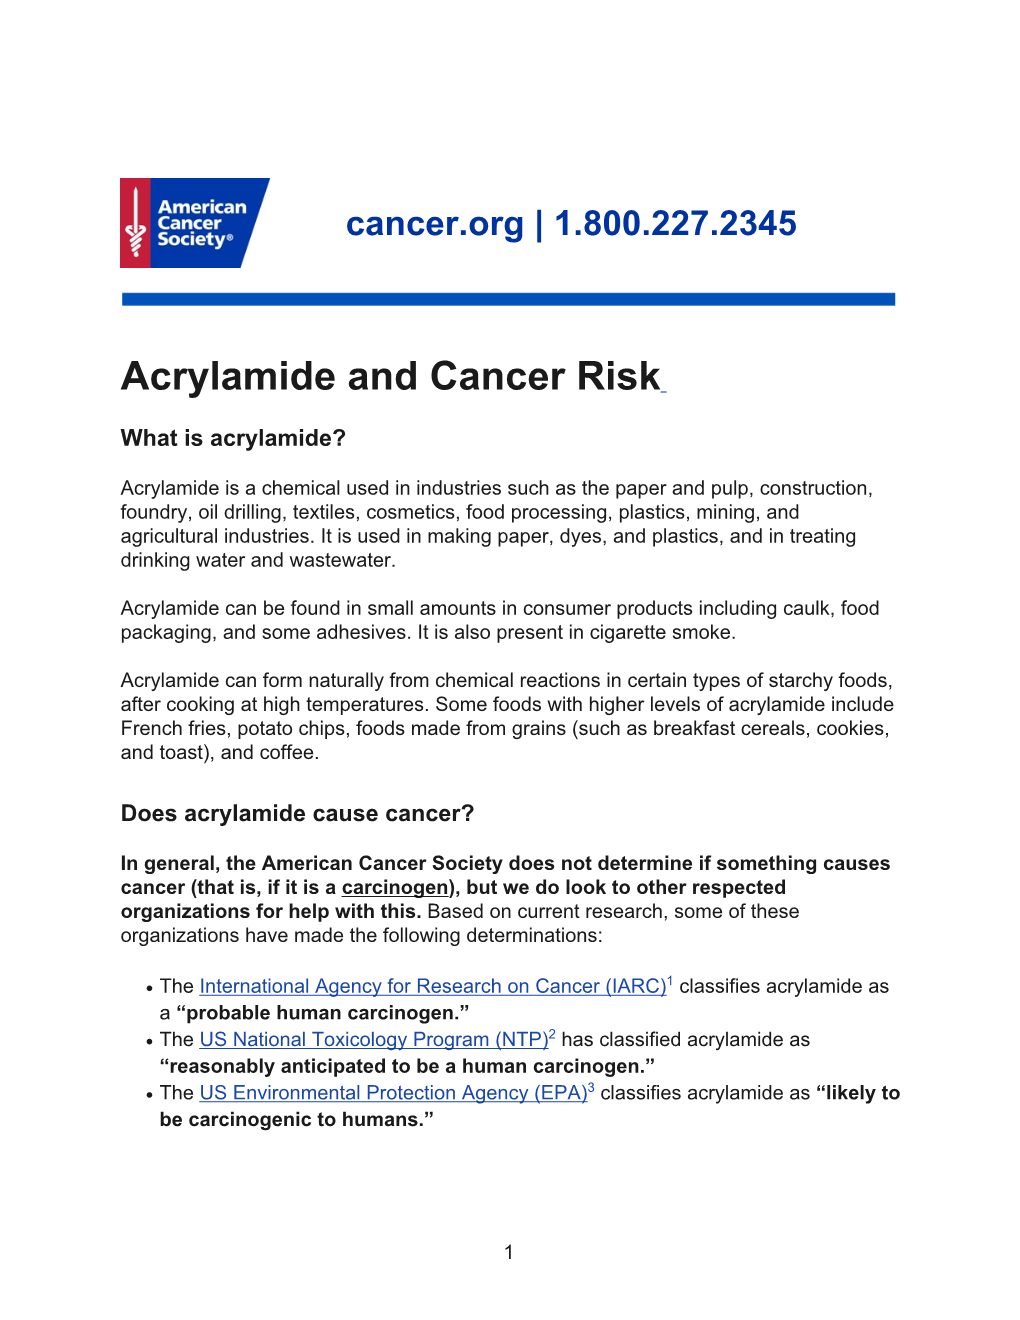 Acrylamide and Cancer Risk